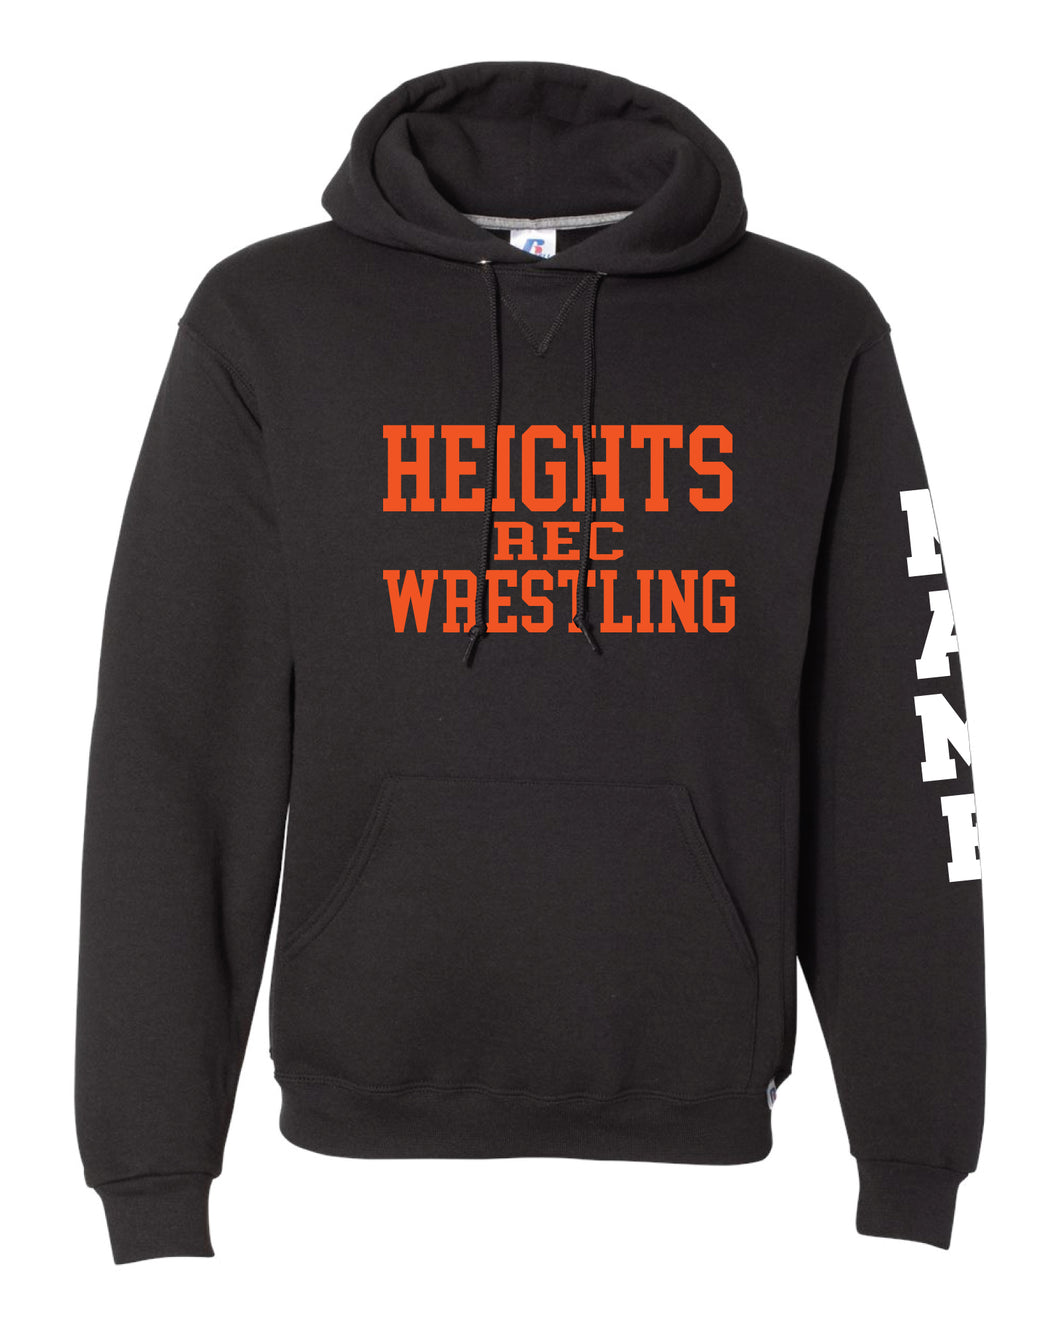 Hasbrouck Heights Wrestling Russell Athletic Cotton Hoodie - Black